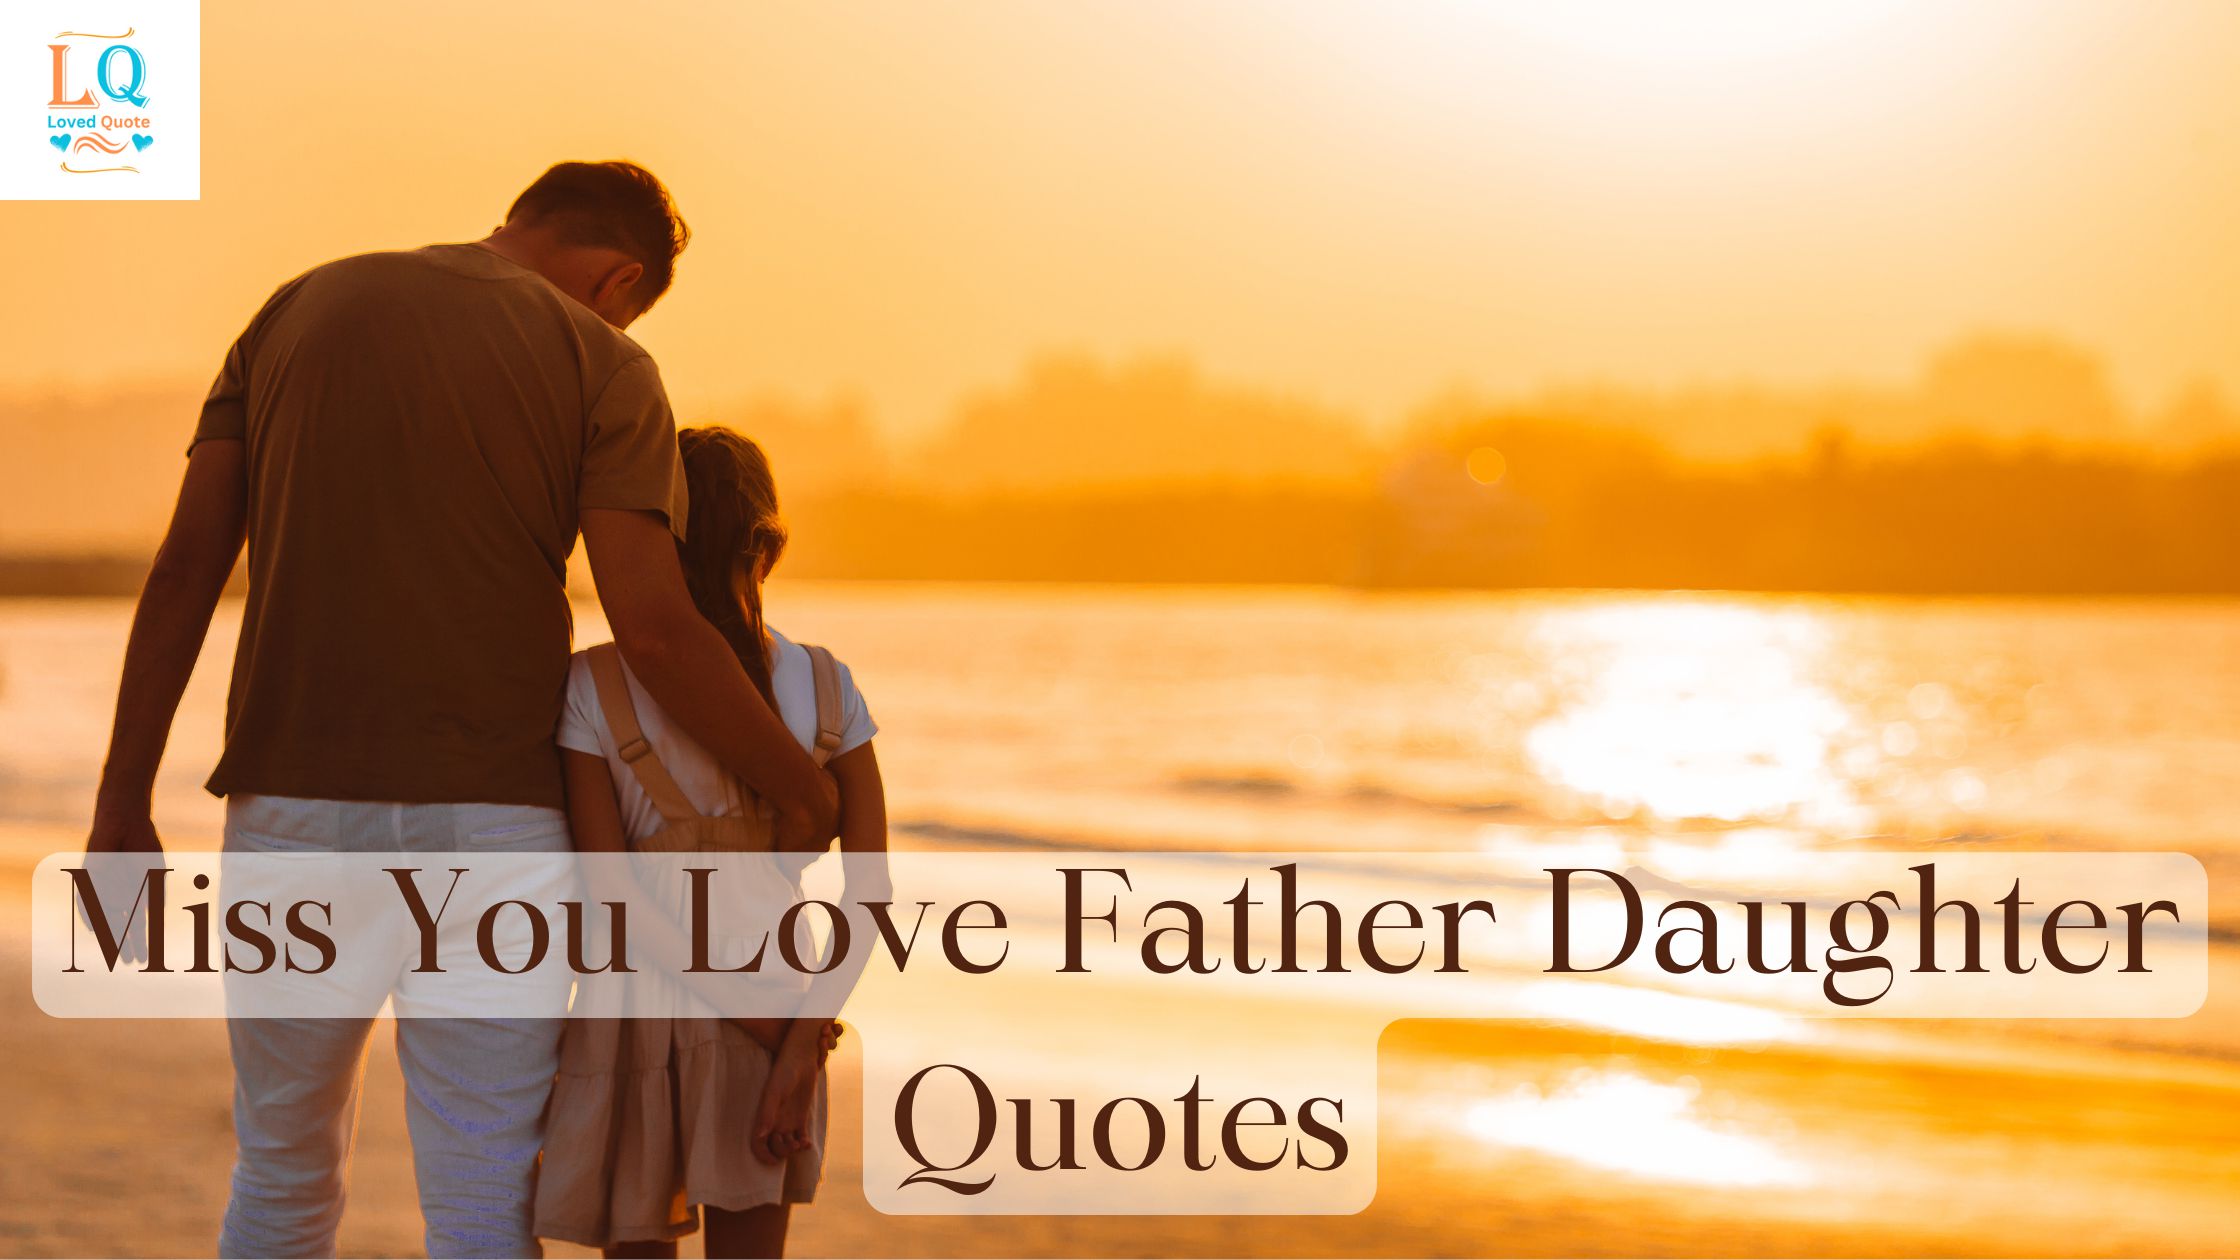 Miss You Love Father Daughter Quotes